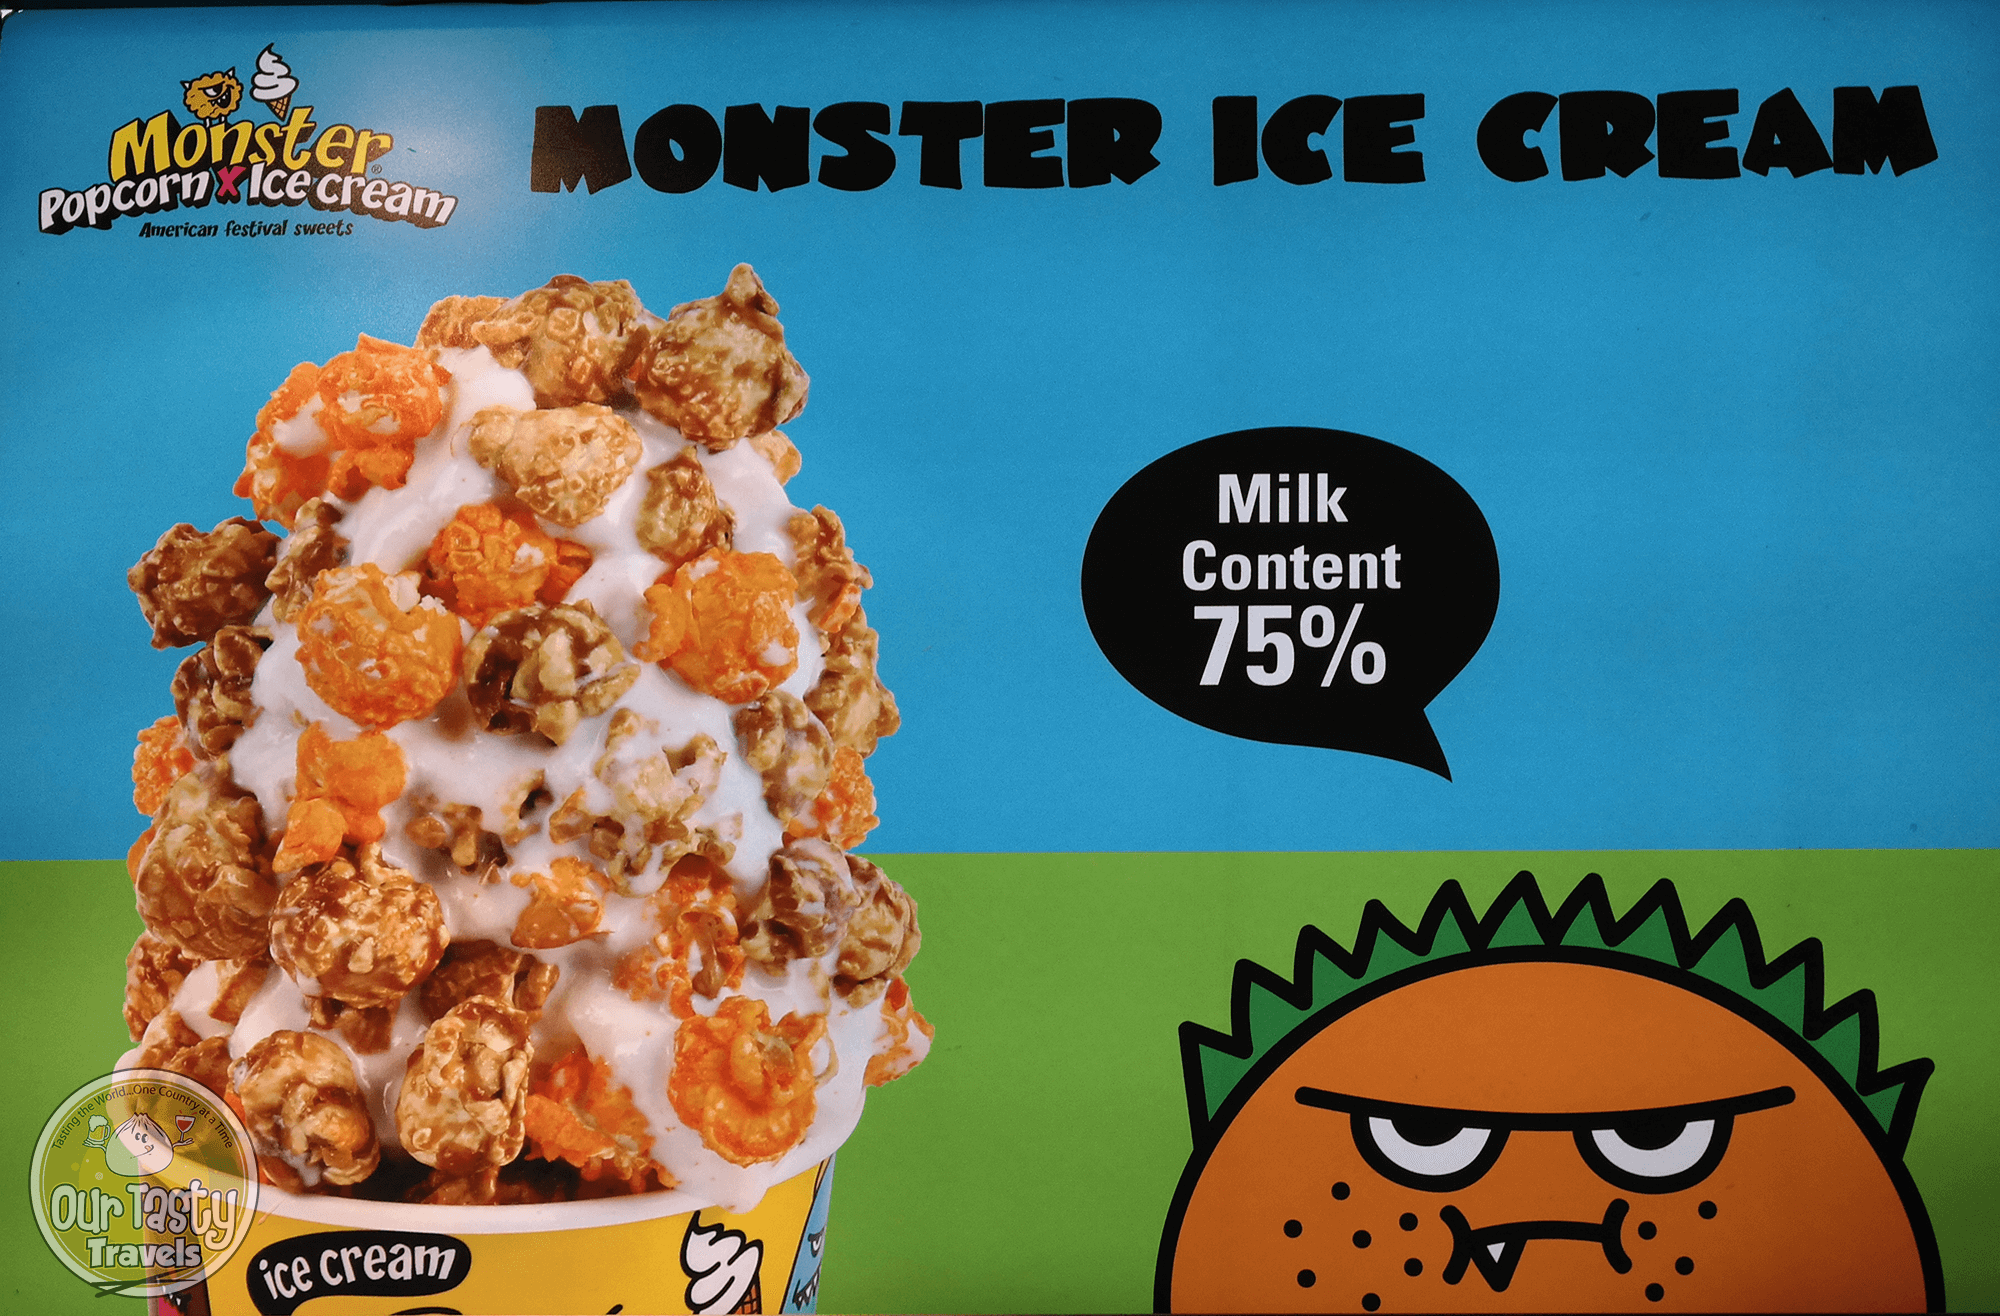 Sweet Monster uses at least 75% milk content in its ice cream. -- ourtastytravels.com